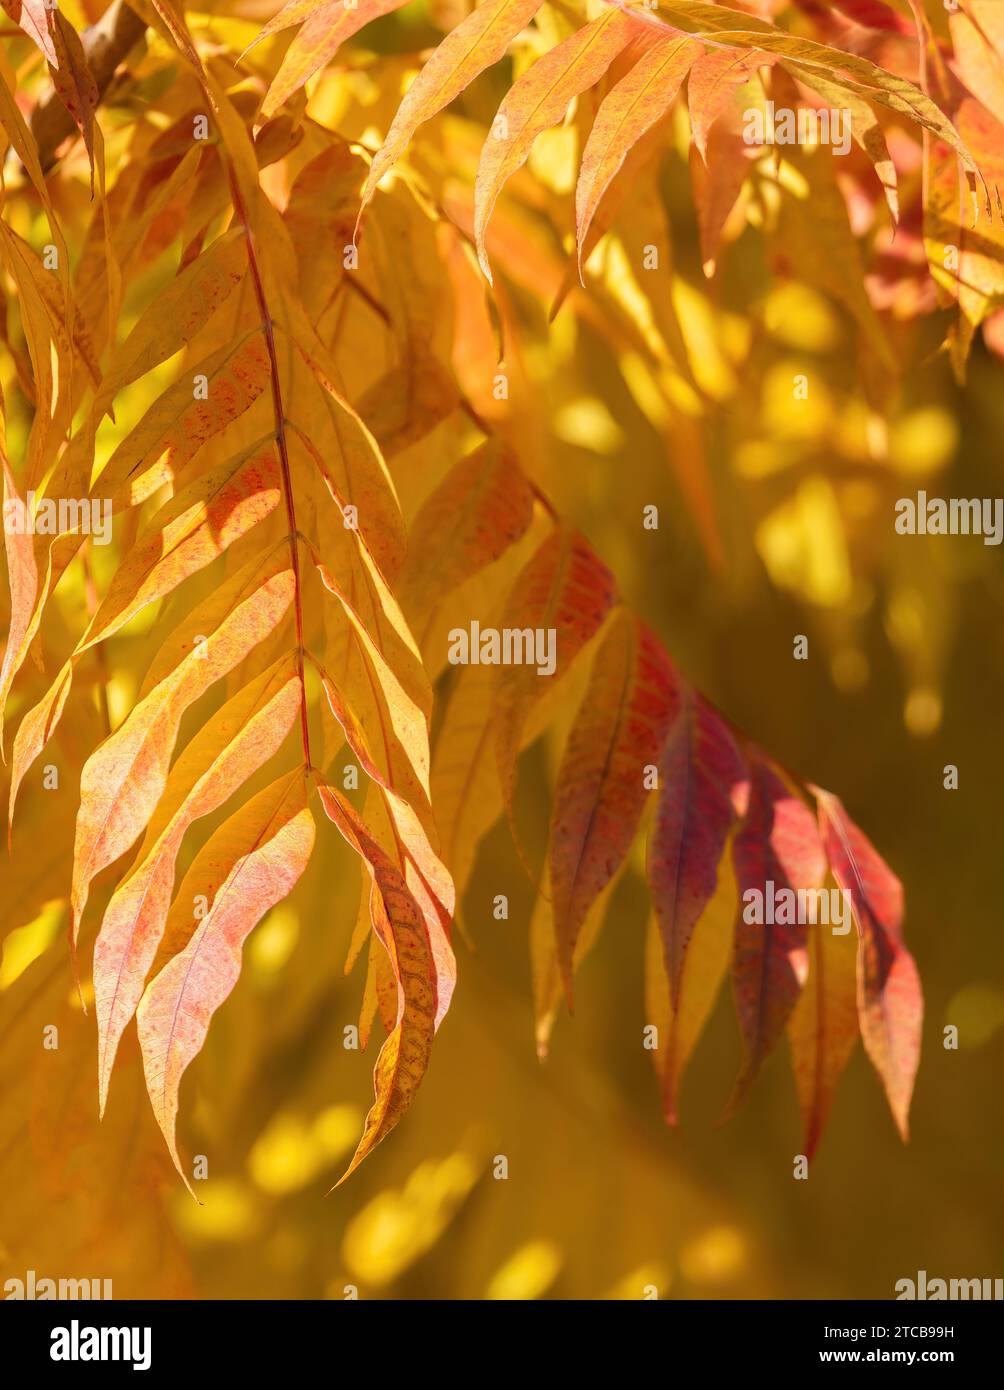 Brightly Lit Autumn Leaves Shining in Sunlight Stock Photo